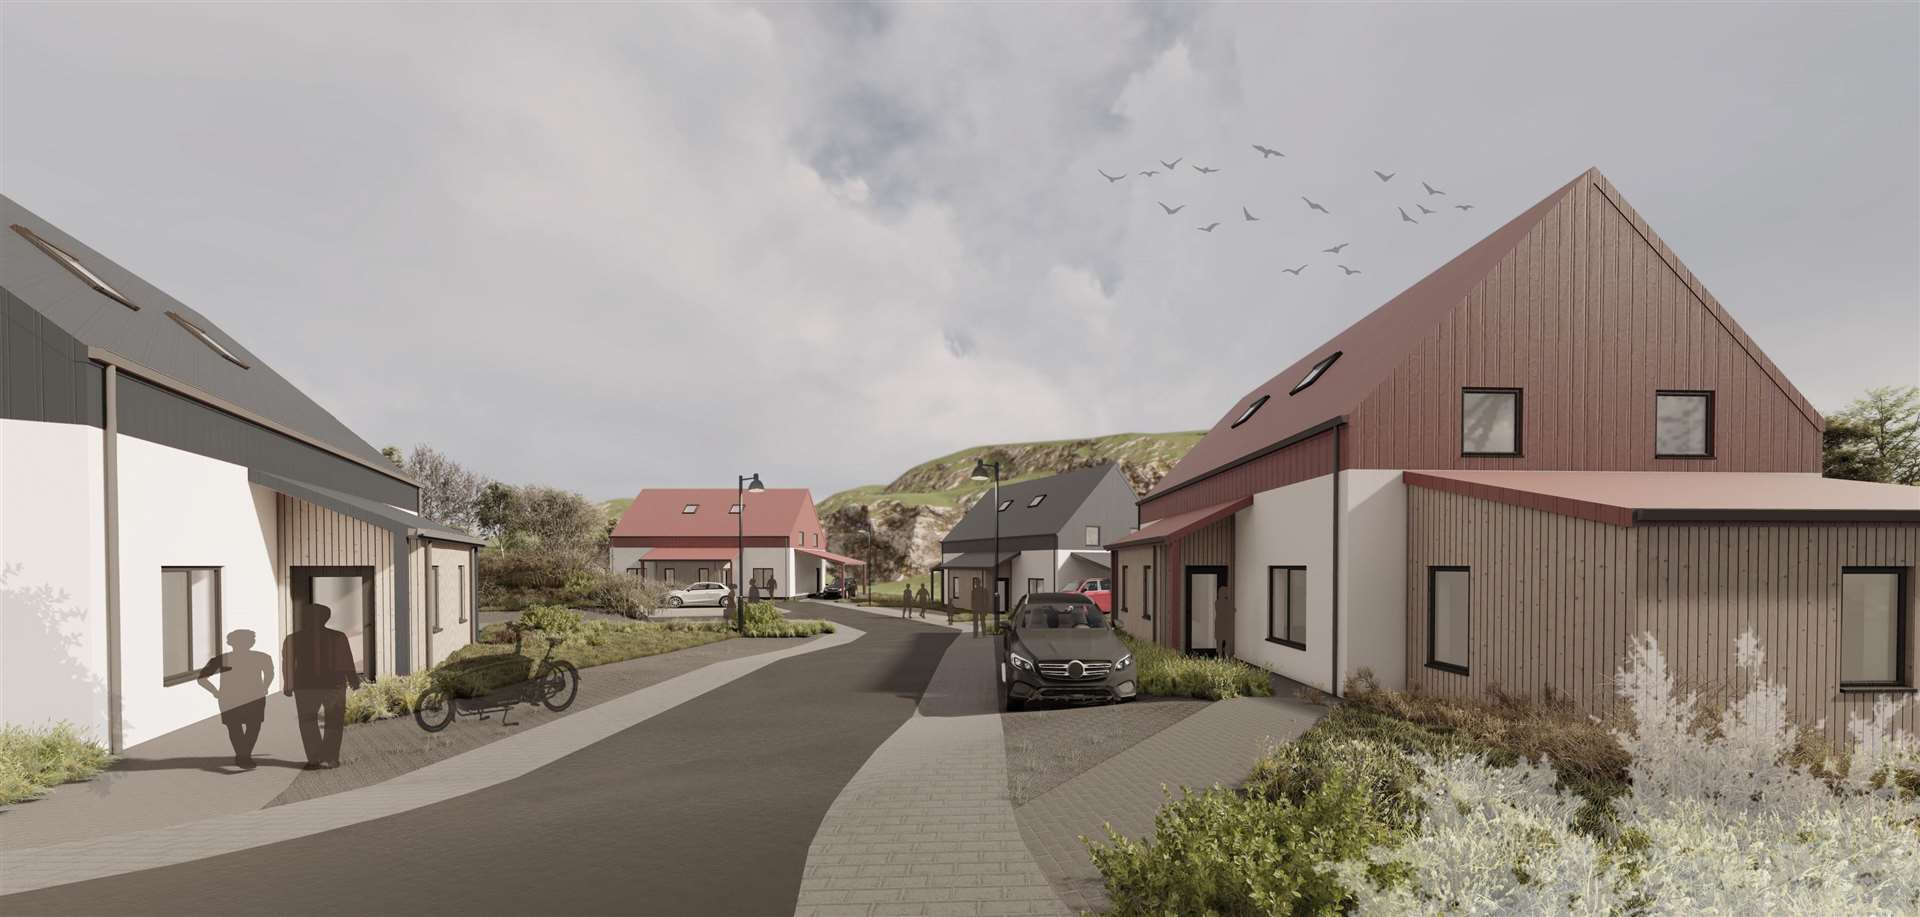 Site A will be used to build eight of the ten new homes in the first phase. Photo: Oberlanders Architects